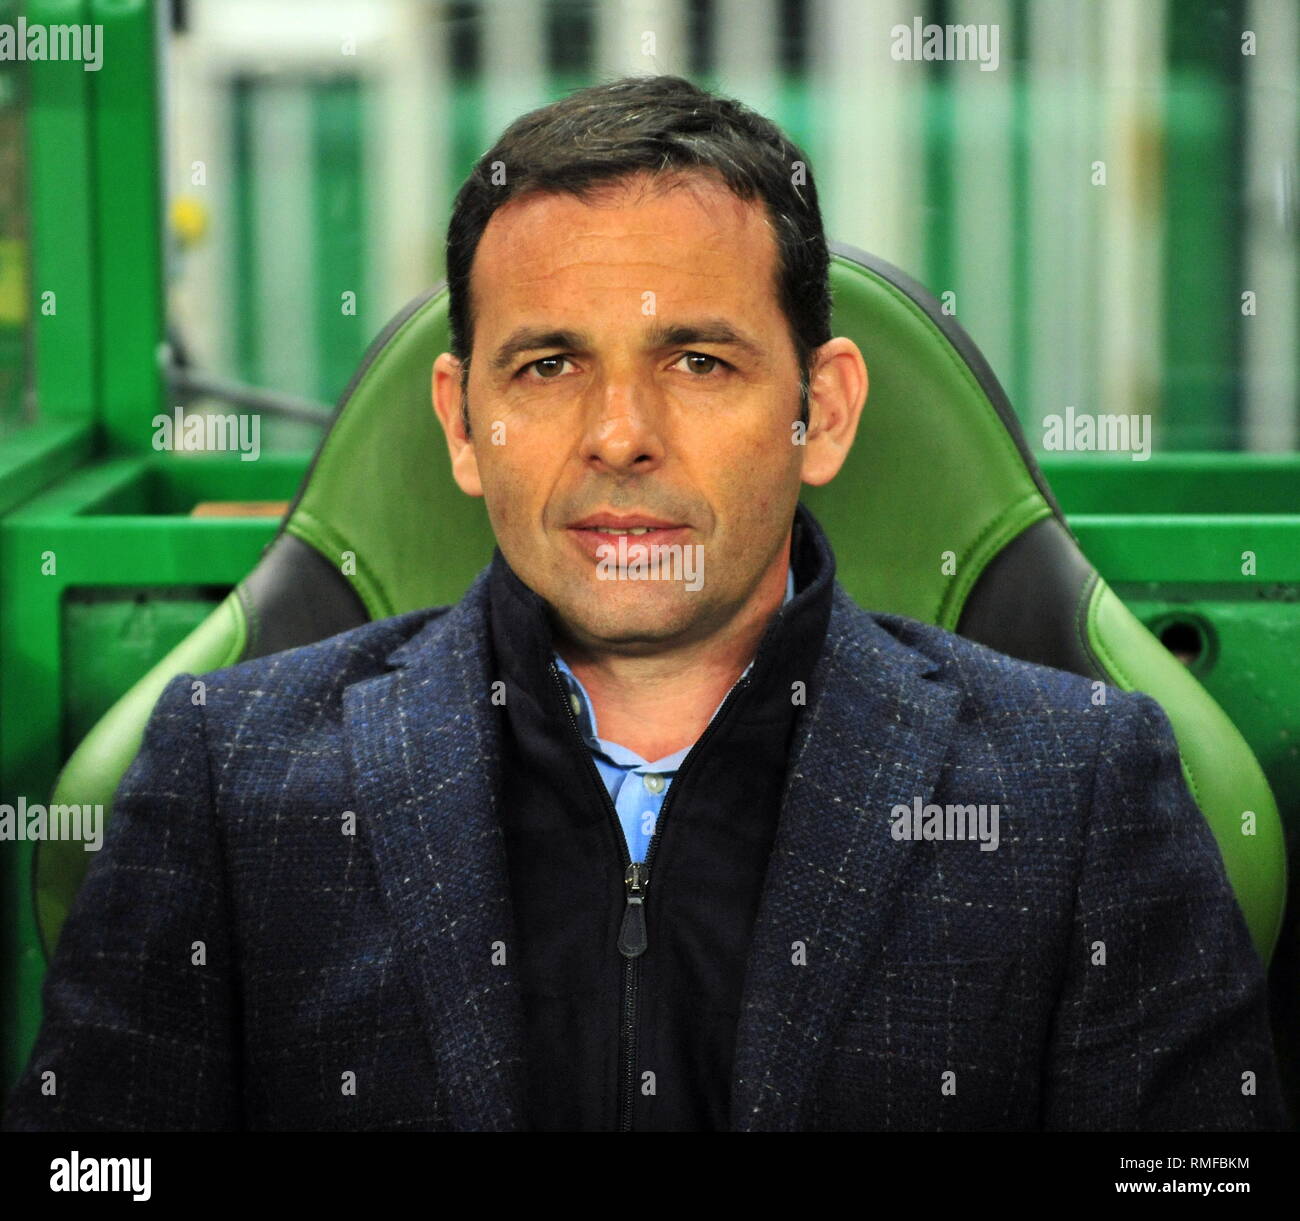 Lisbon Portugal 14th Feb 2019 Head Coach Javier Celleja Of Villarreal Reacts Before The Uefa Europa League Round Of 32 First Leg Soccer Match Between Sporting Cp And Villarreal In Lisbon Portugal